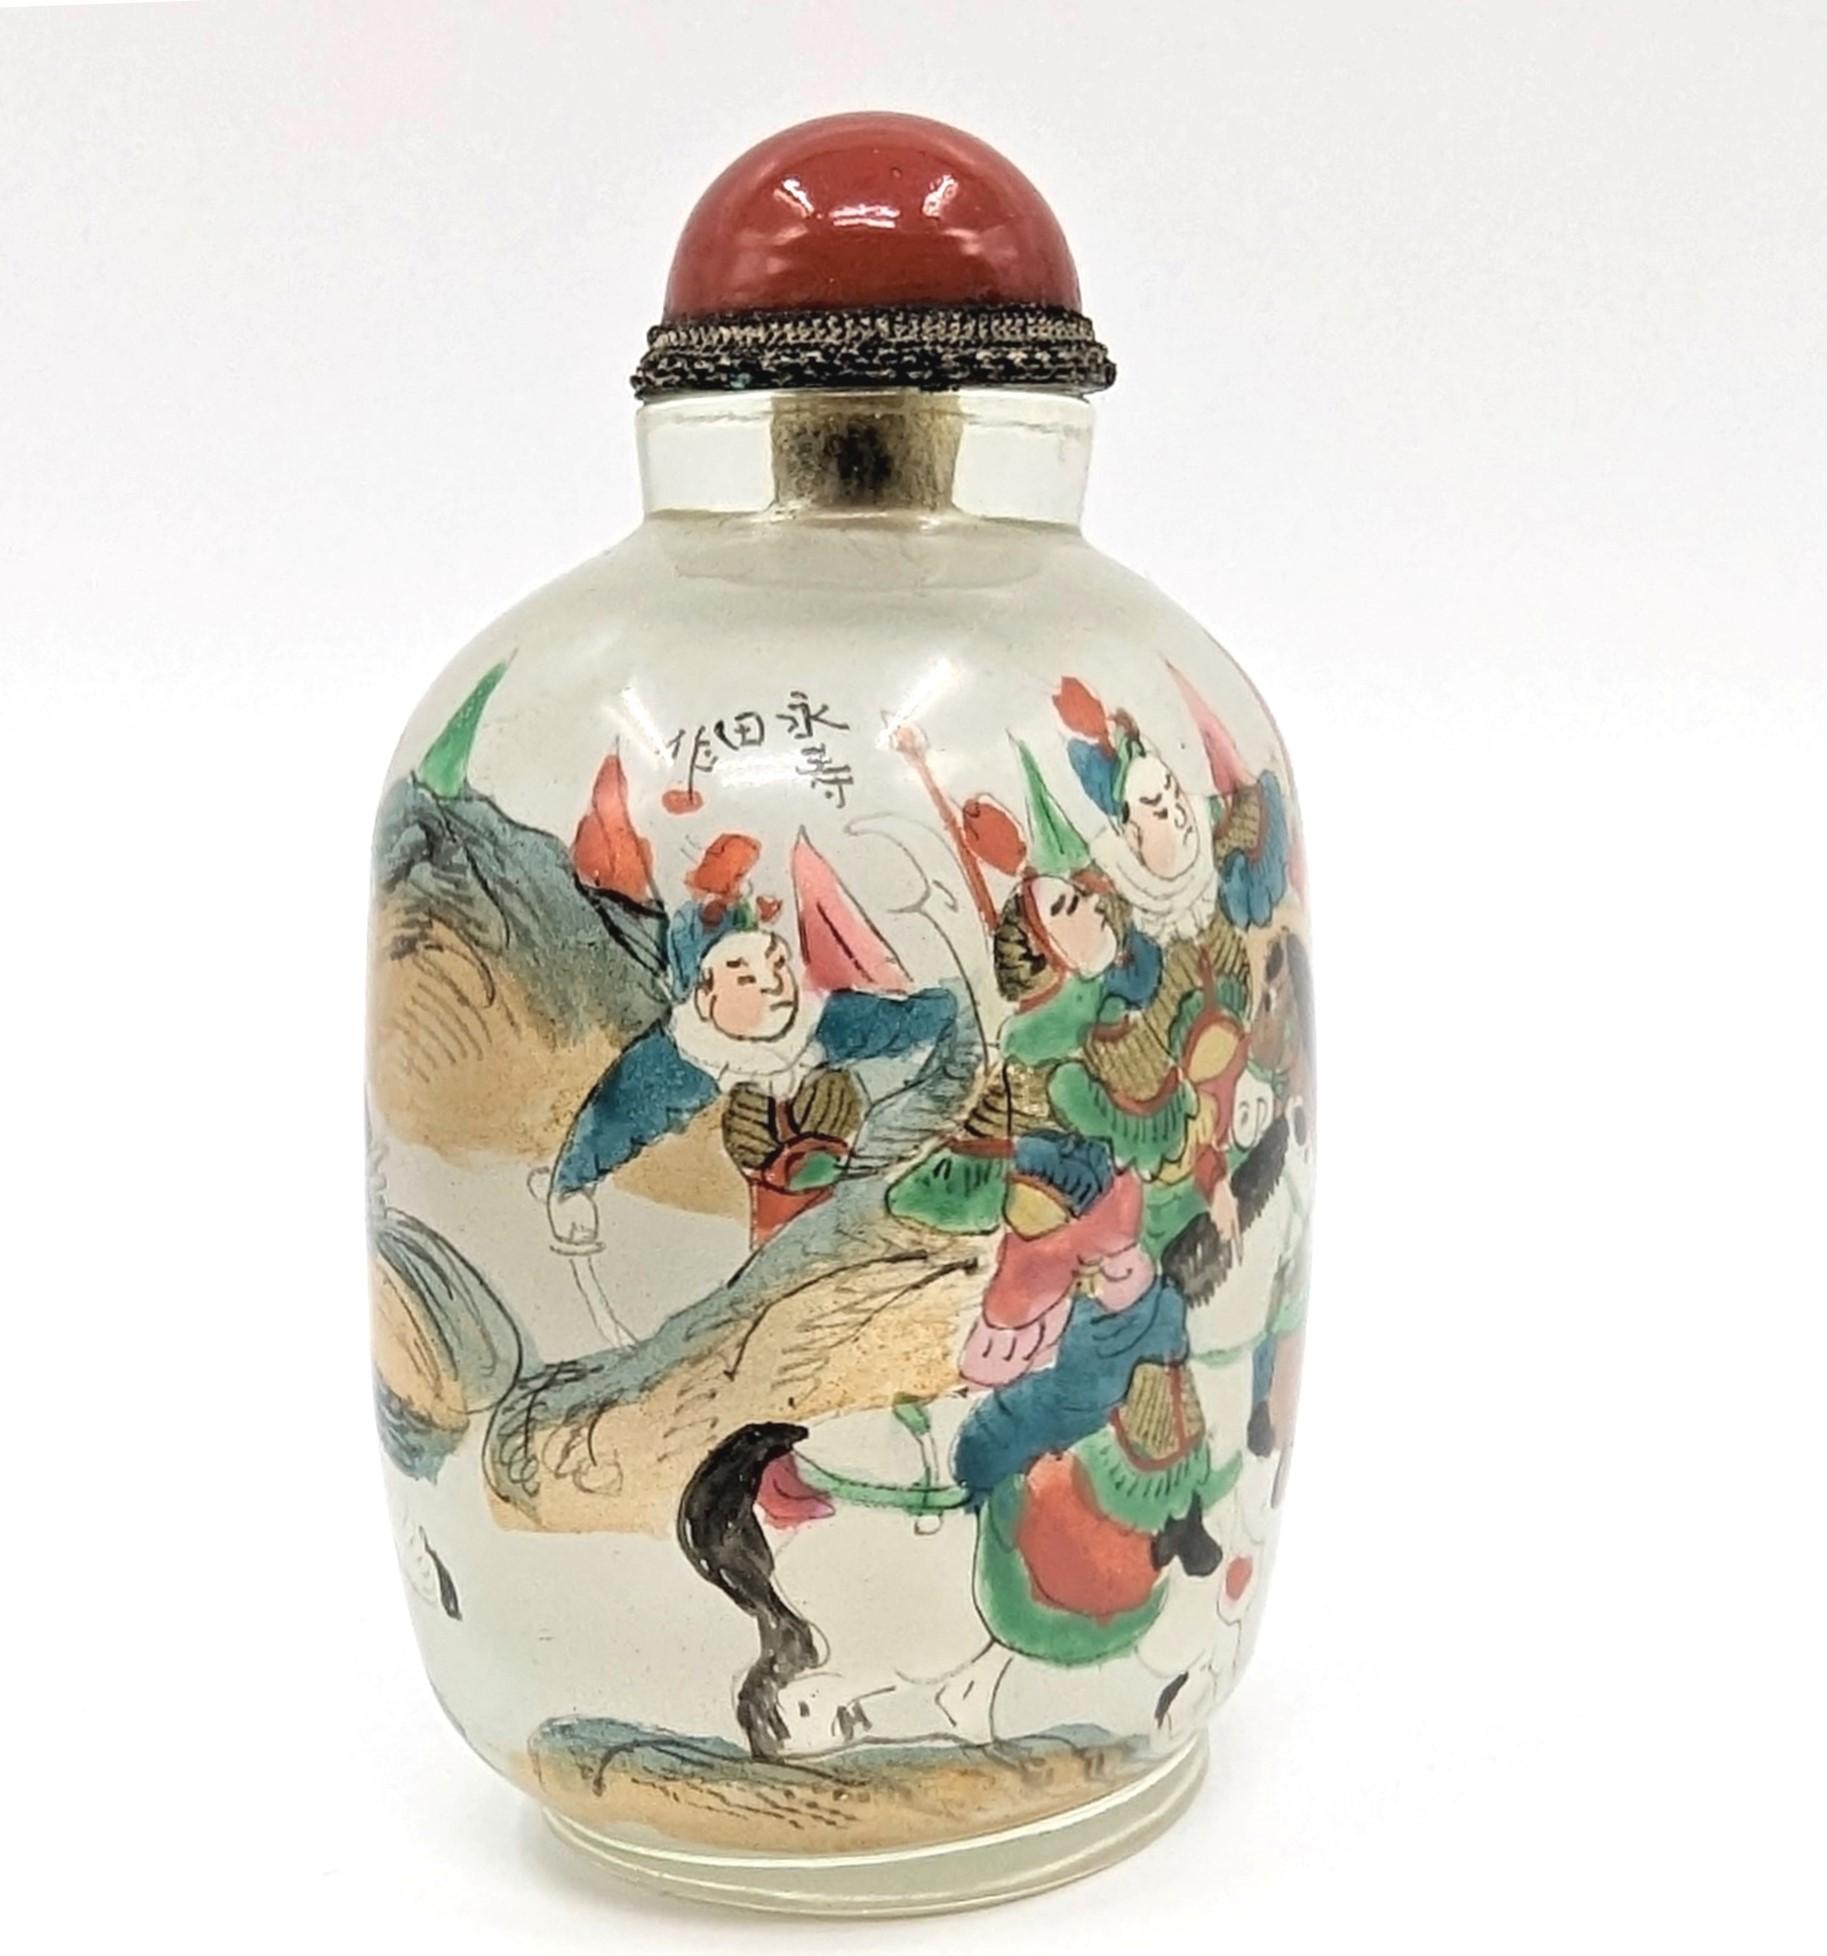 A large antique Chinese inside painted glass snuff bottle, finely decorated with a continuous battle scene with mounted warriors in golden armour, signed Yong Shoutian with a red seal mark

Early 20th Century, Republic Period